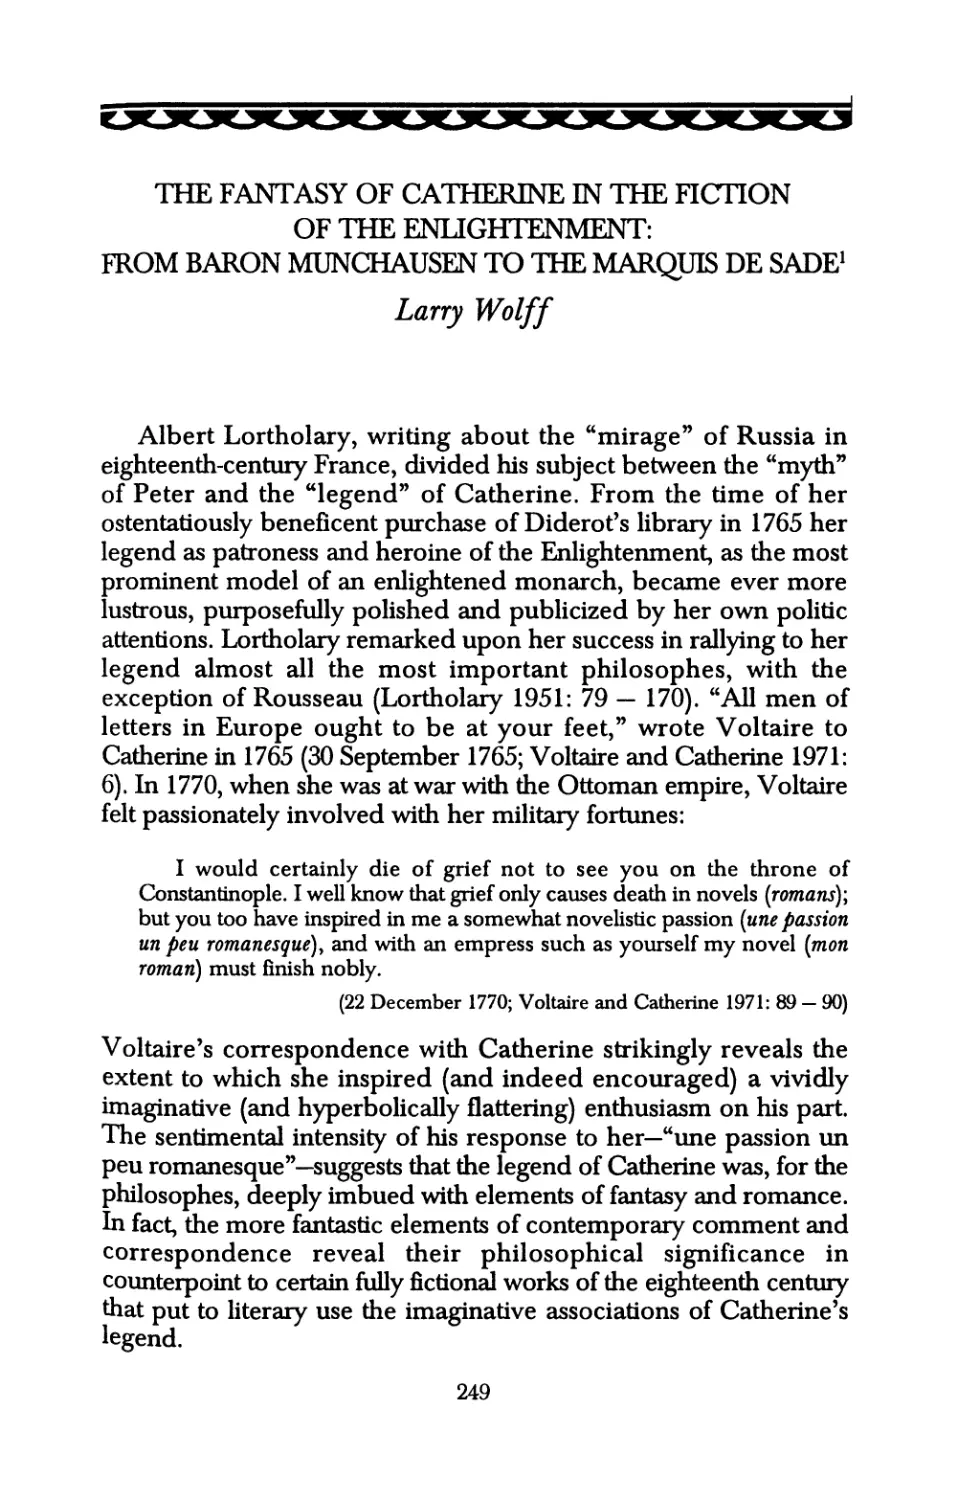 The Fantasy of Catherine in the Fiction of the Enlightenment: From Baron Munchausen to the Marquis de Sade. Larry Wolff